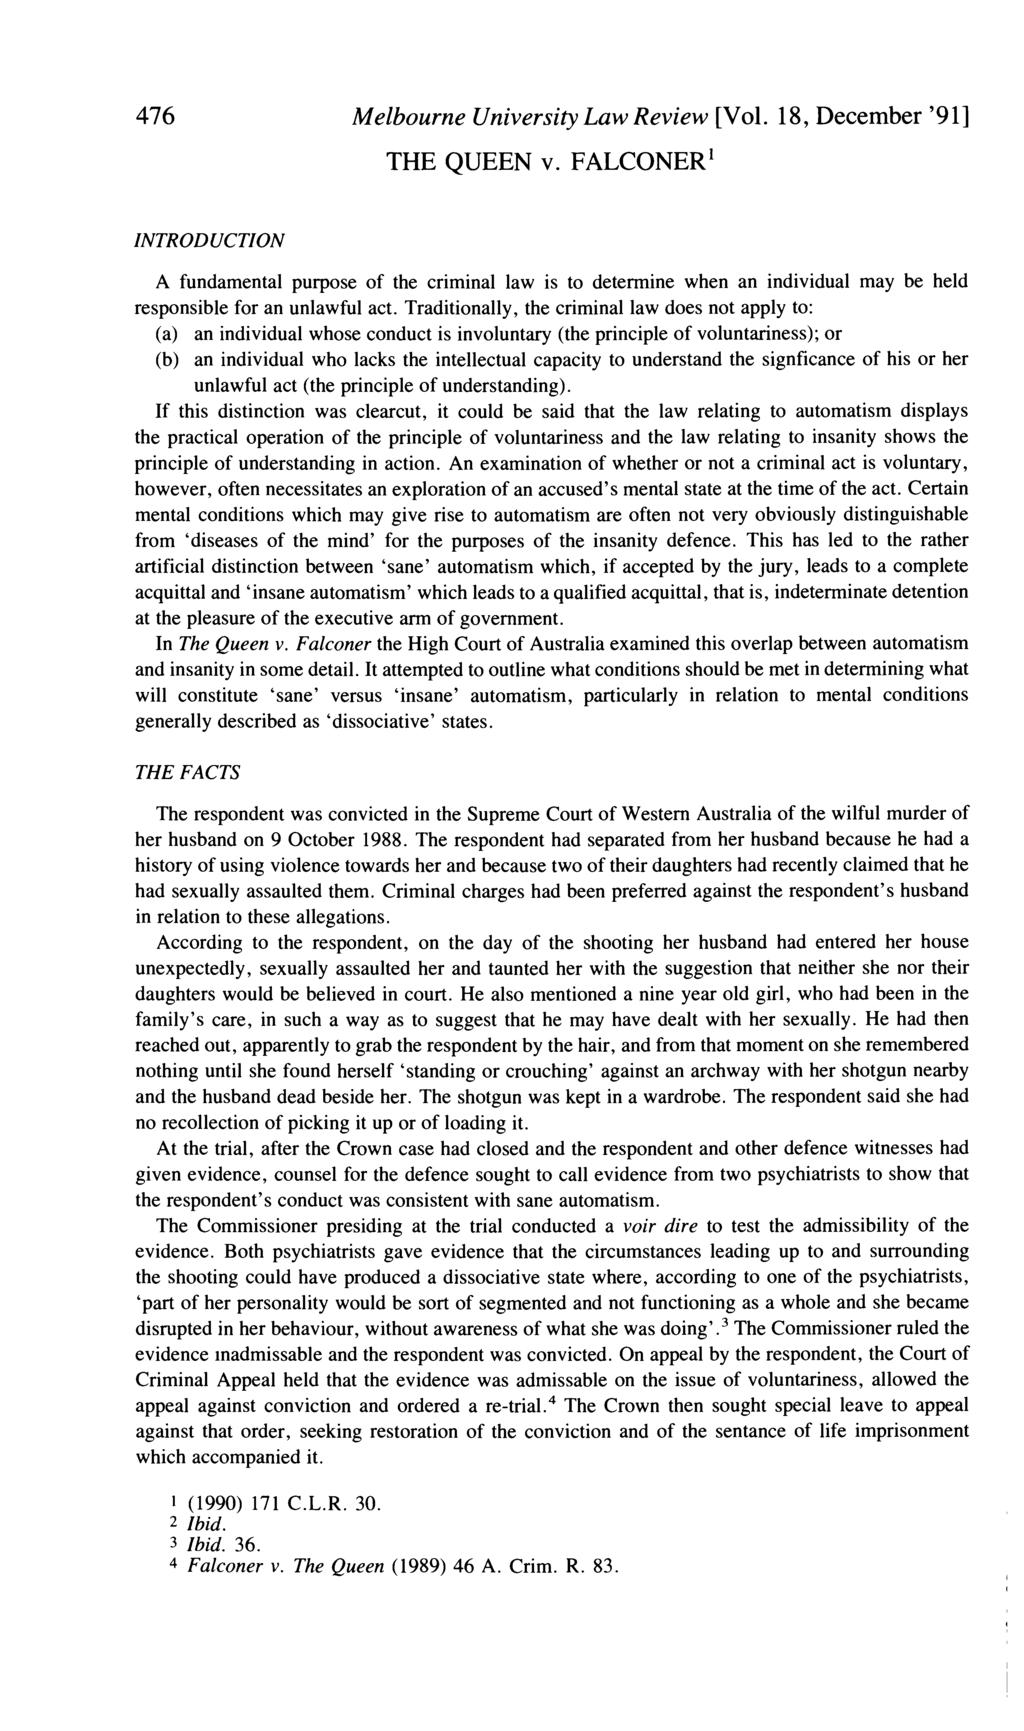 Melbourne University Law Review [Vol. 18, December '911 THE QUEEN v. FALCONER' A fundamental purpose of the criminal law is to determine when an individual may be held responsible for an unlawful act.